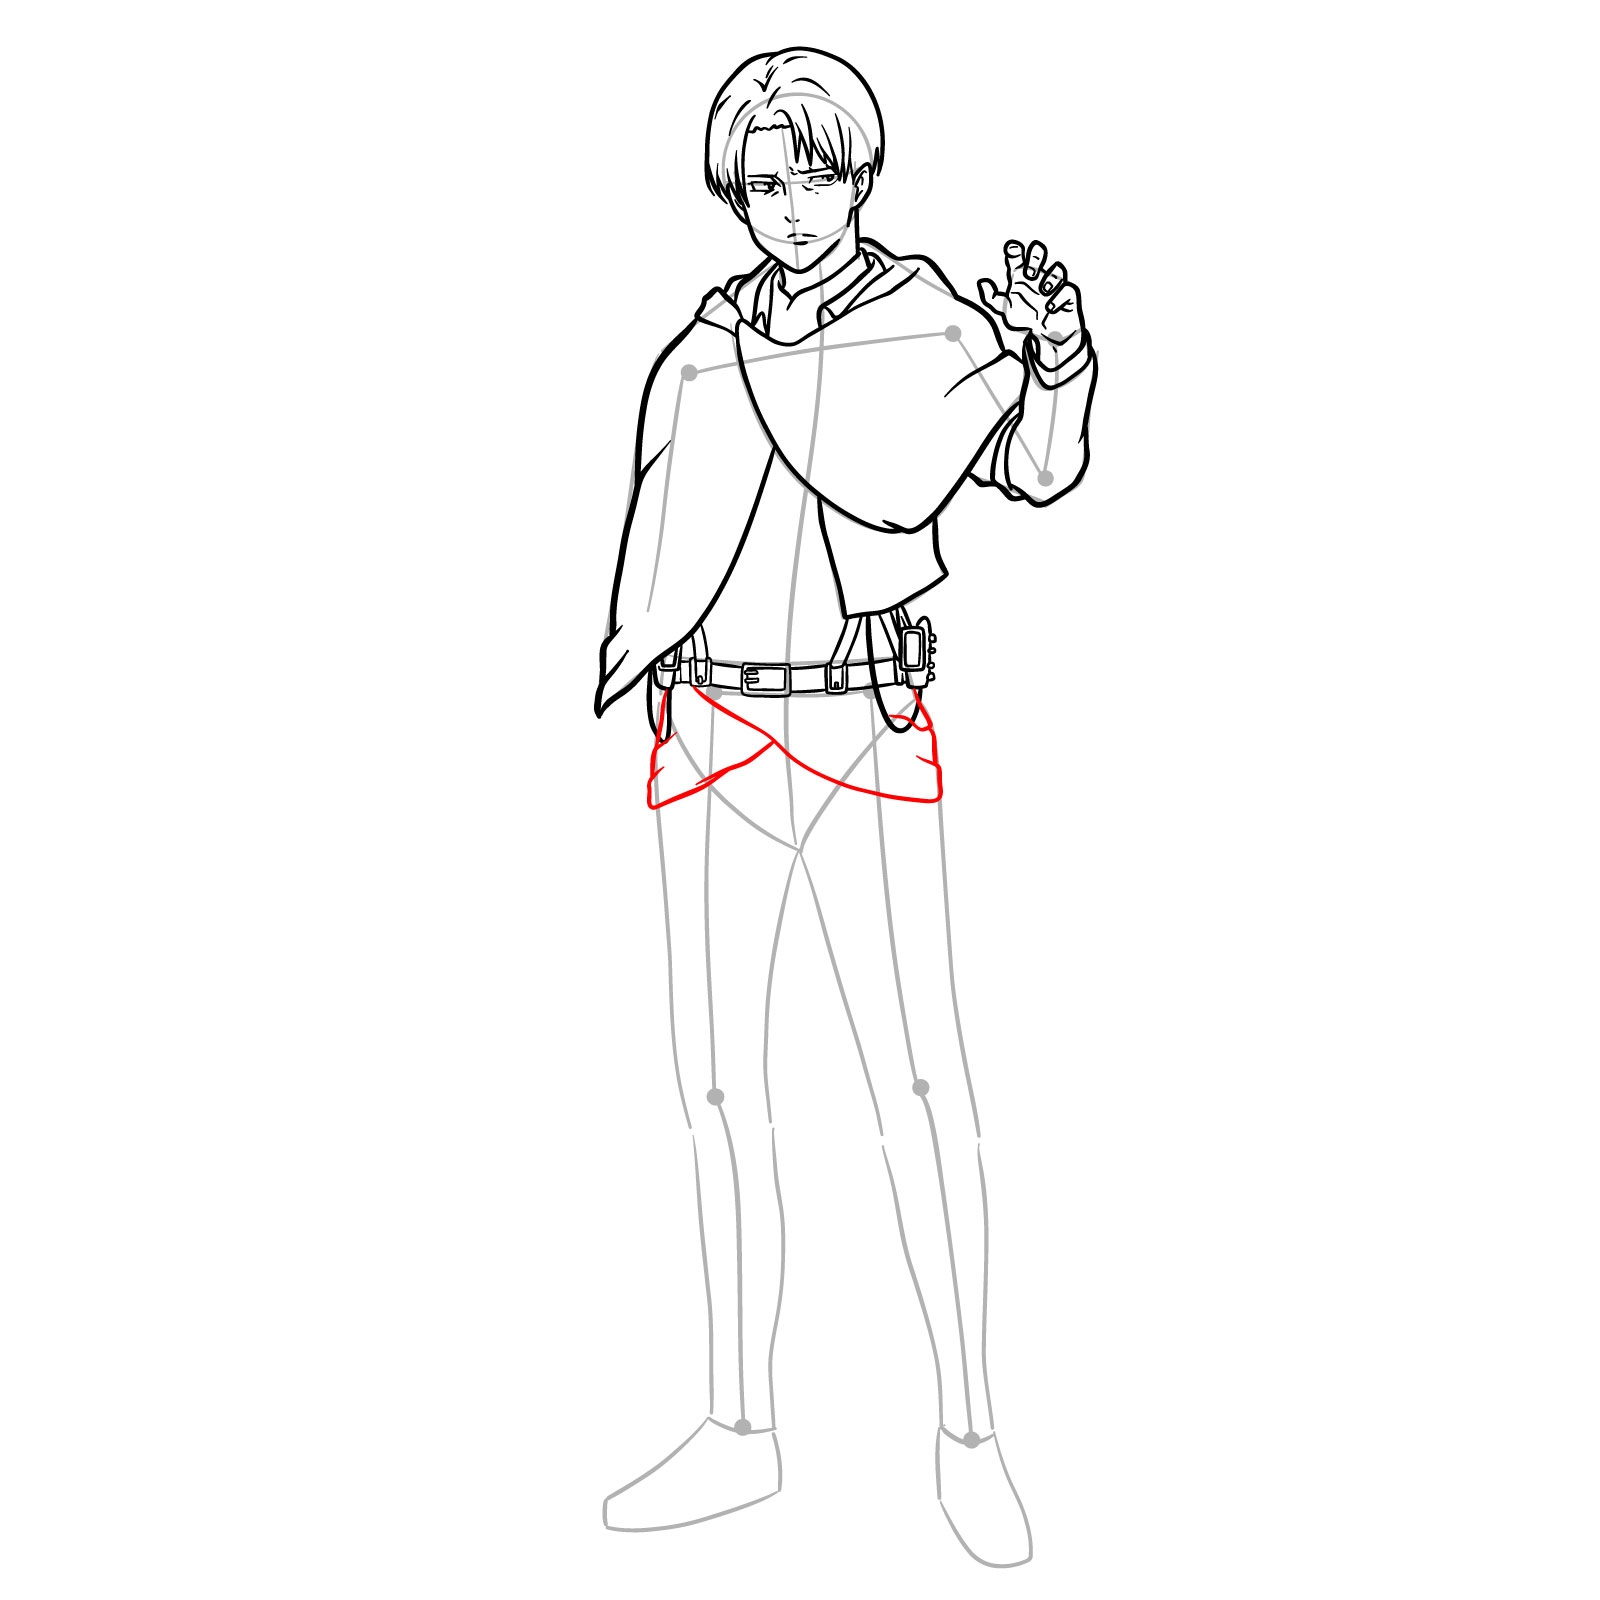 Step-by-step guide on drawing Captain Levi's legs and left ODM gear for a full body portrait - step 18